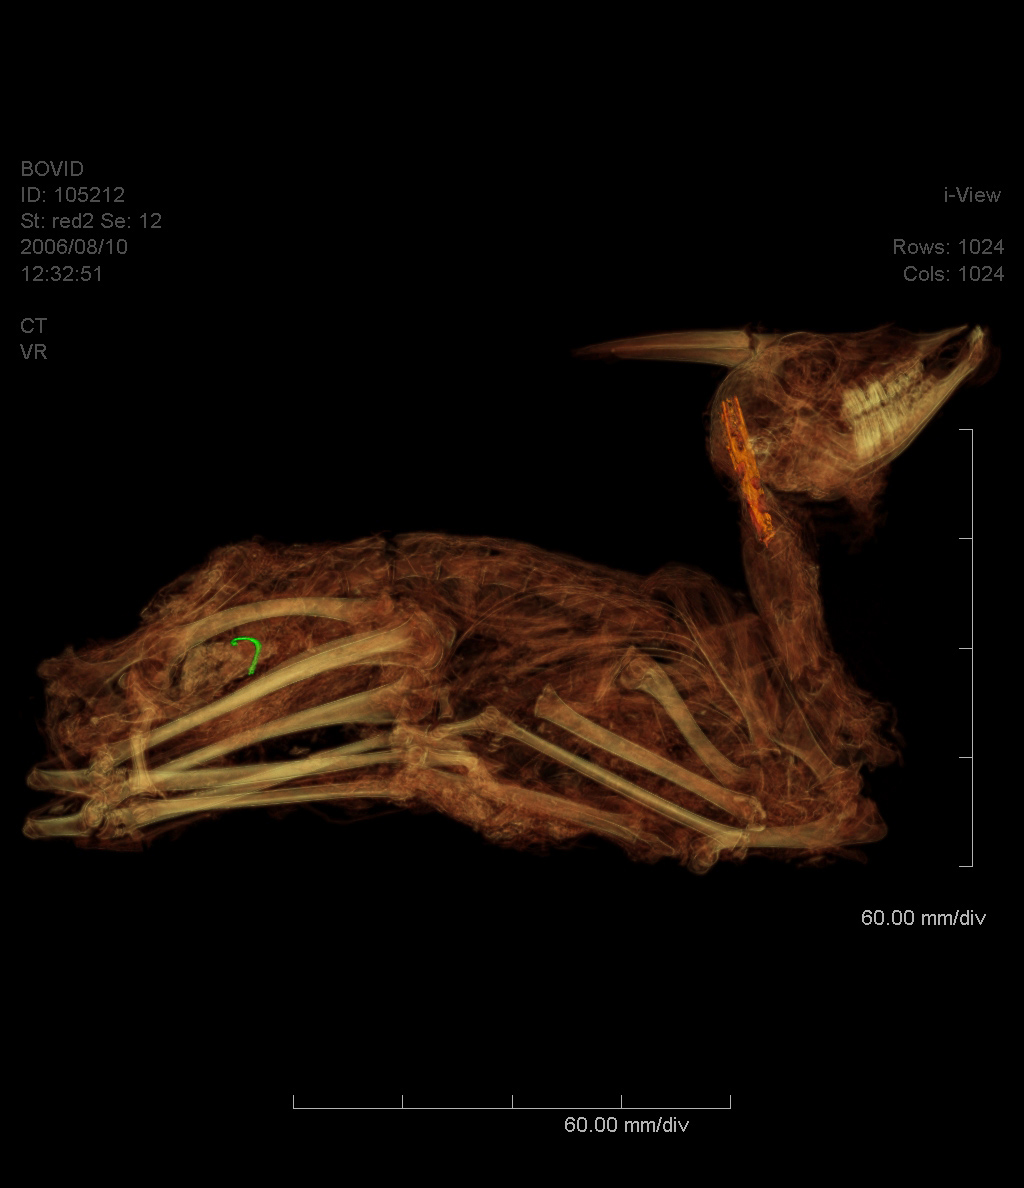 By selectively making some areas more transparent, we can see additional features.  There is a metal hook (rendered green) which was left in the animal's hind-quarters. There is also a piece of cane (rendered orange) thrust through two of the cervical vertebrae and into the foramen magnum of the skull, presumably to ensure that the head was kept in the required position.